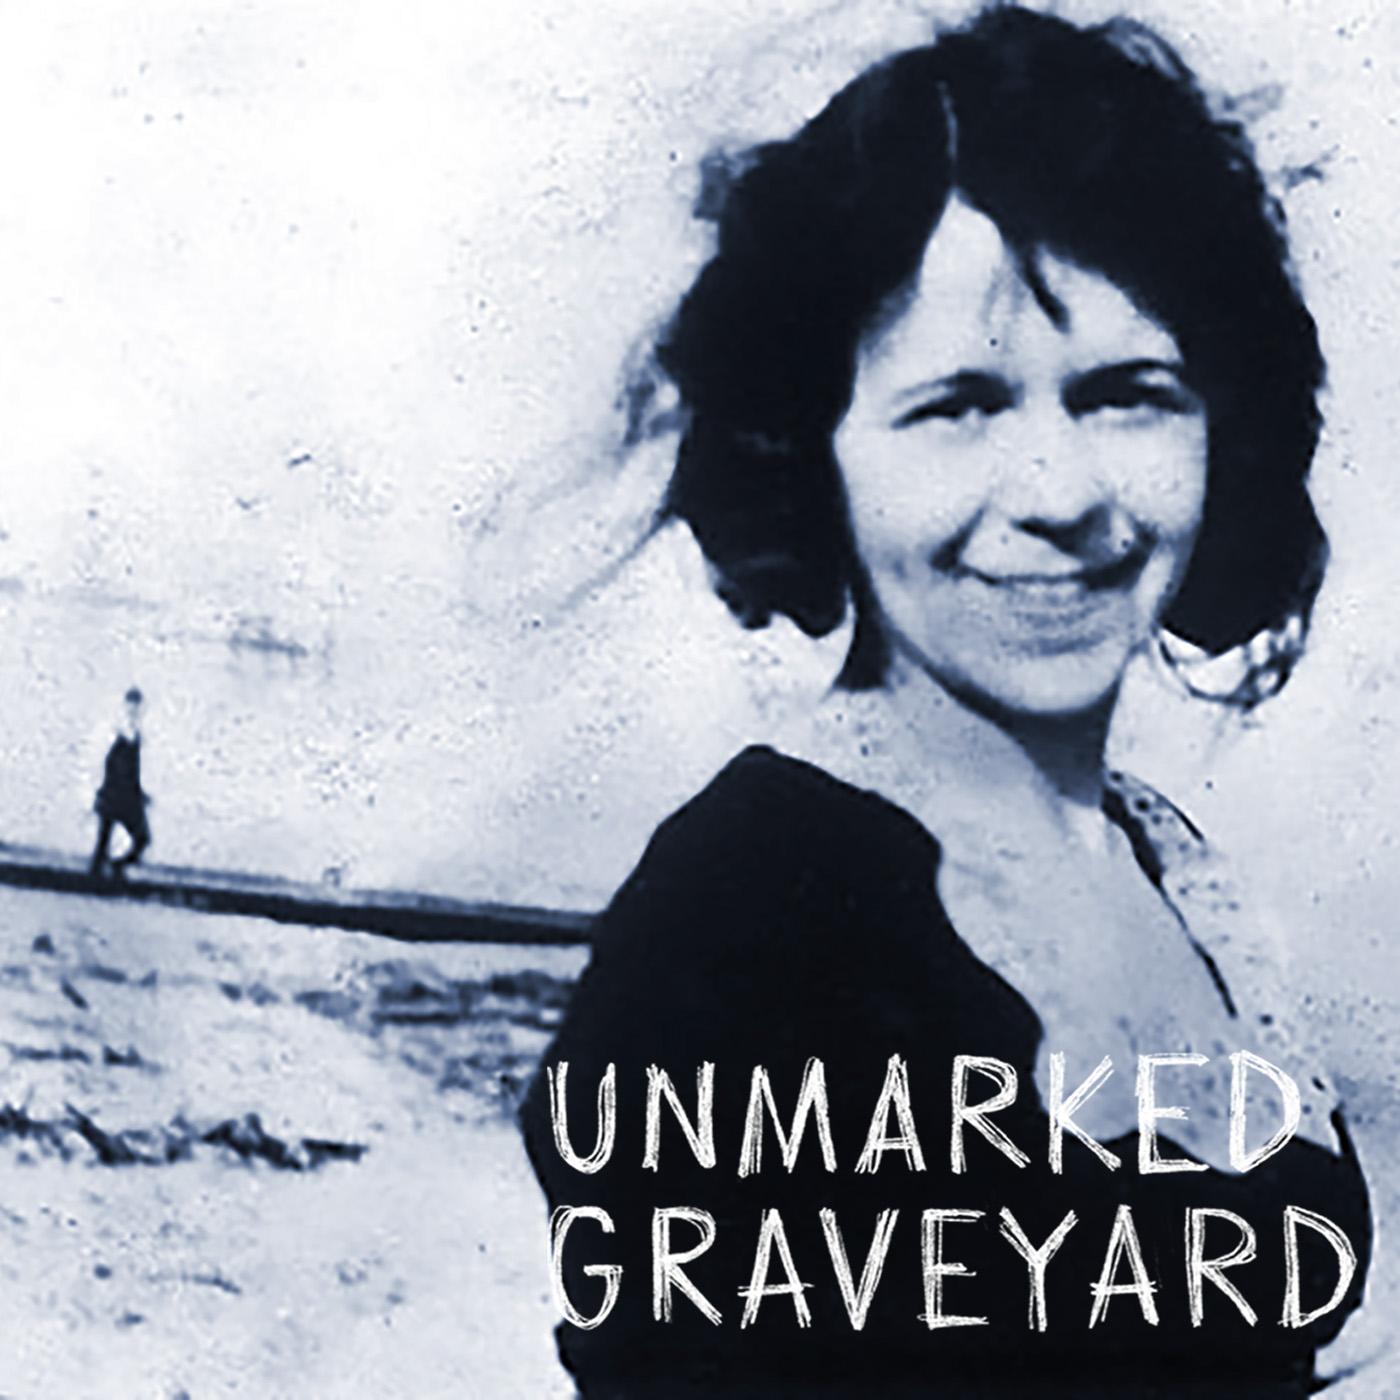 Thumbnail for "The Unmarked Graveyard: Dawn Powell".